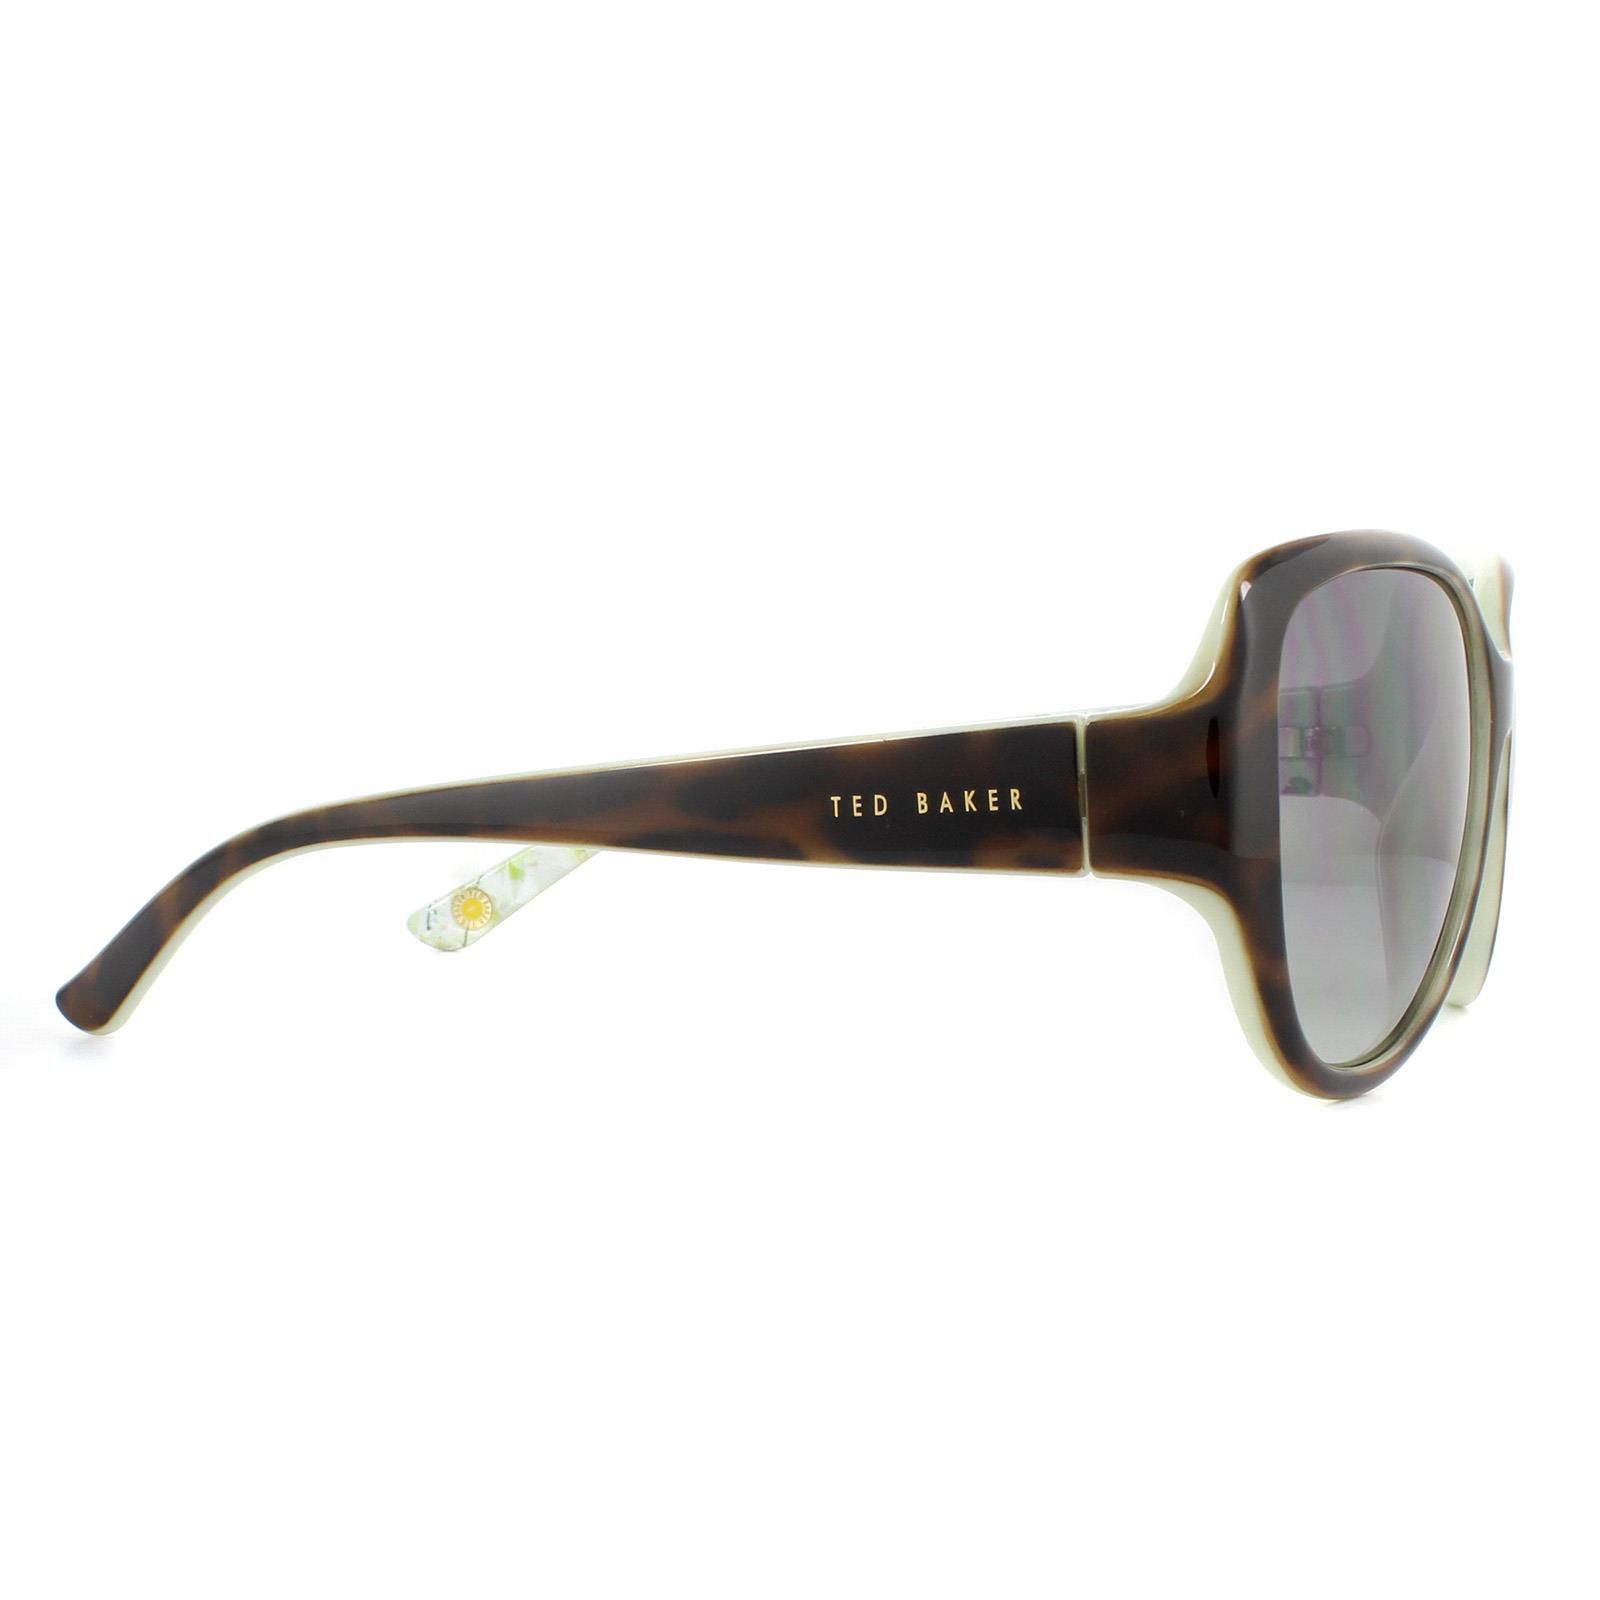 Ted Baker Sunglasses TB1394 Shay 112 Tortoise Green Grey Gradient are an ultra feminine oval style with a lovely floral design on the insides of the temples and finished with the Ted Baker logo.